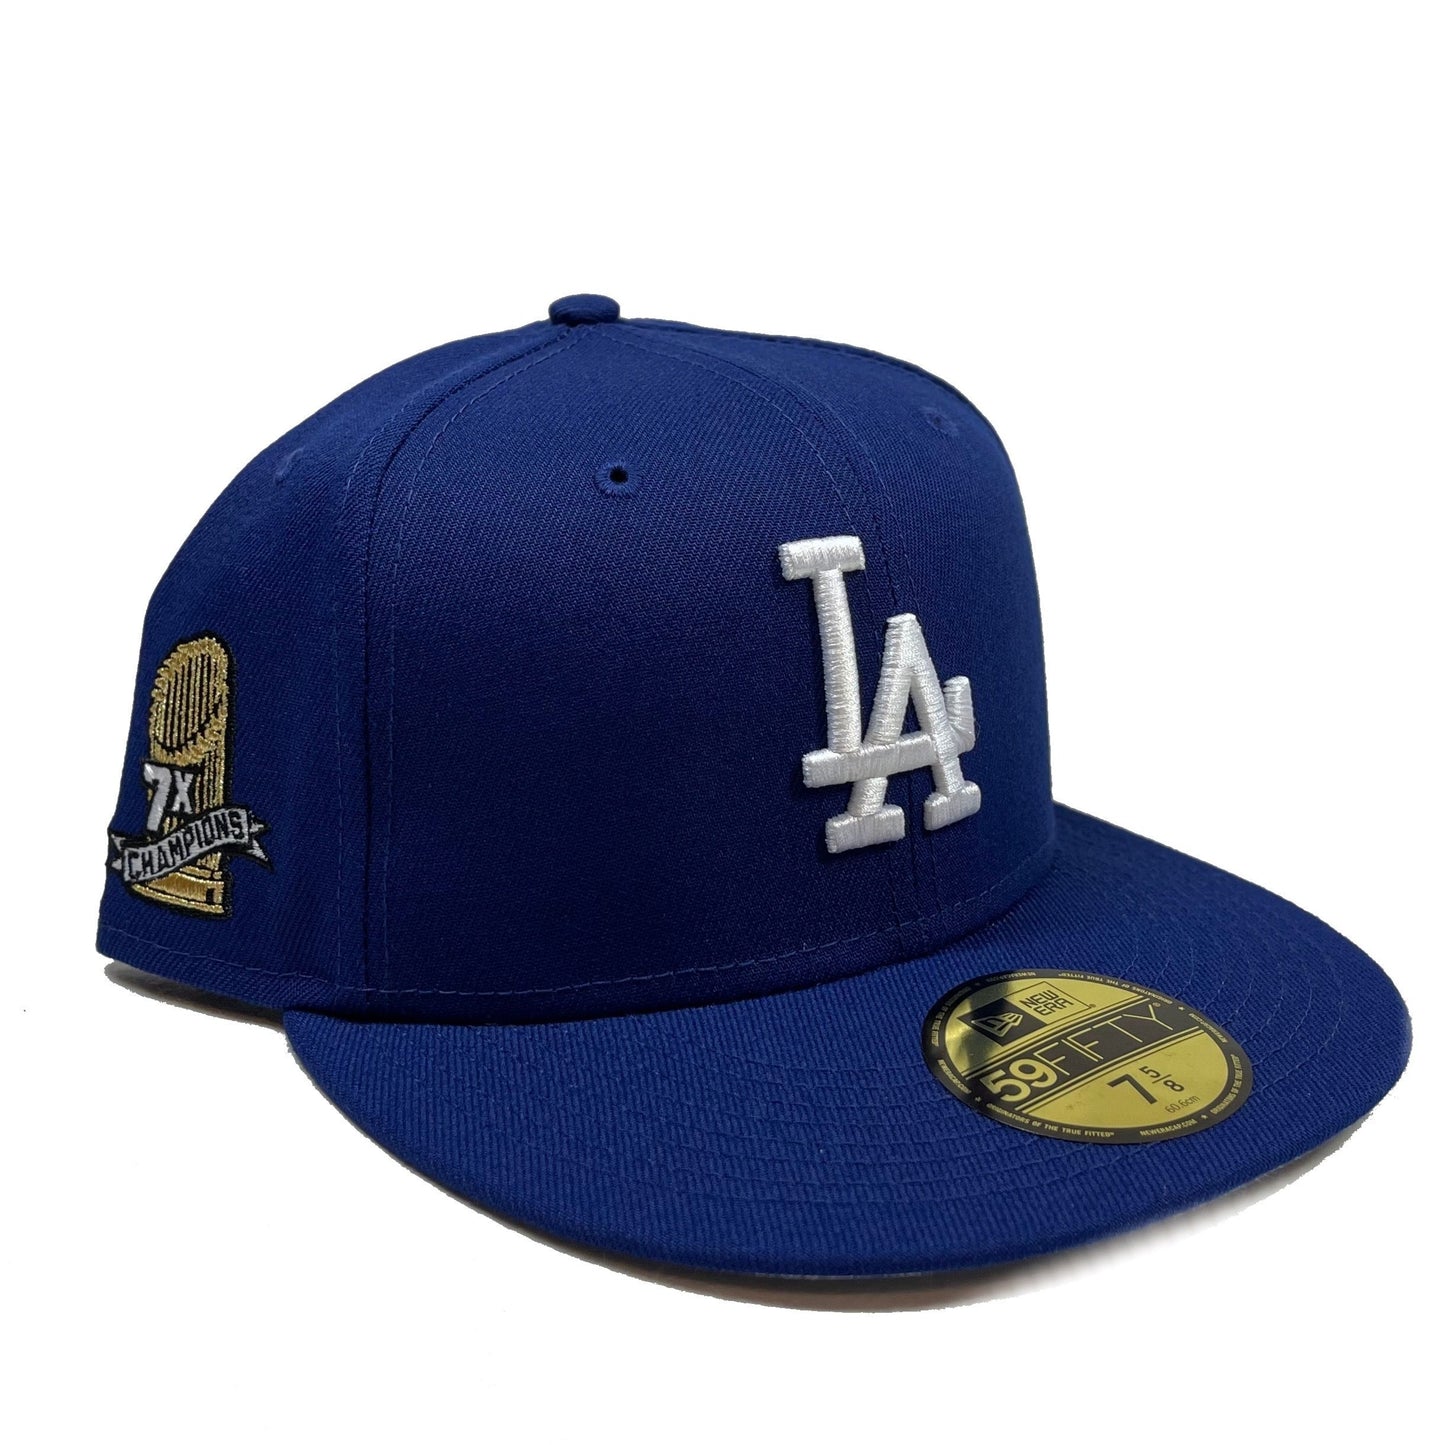 Los Angeles Dodgers 7x Champions (Blue) Snapback/Fitted